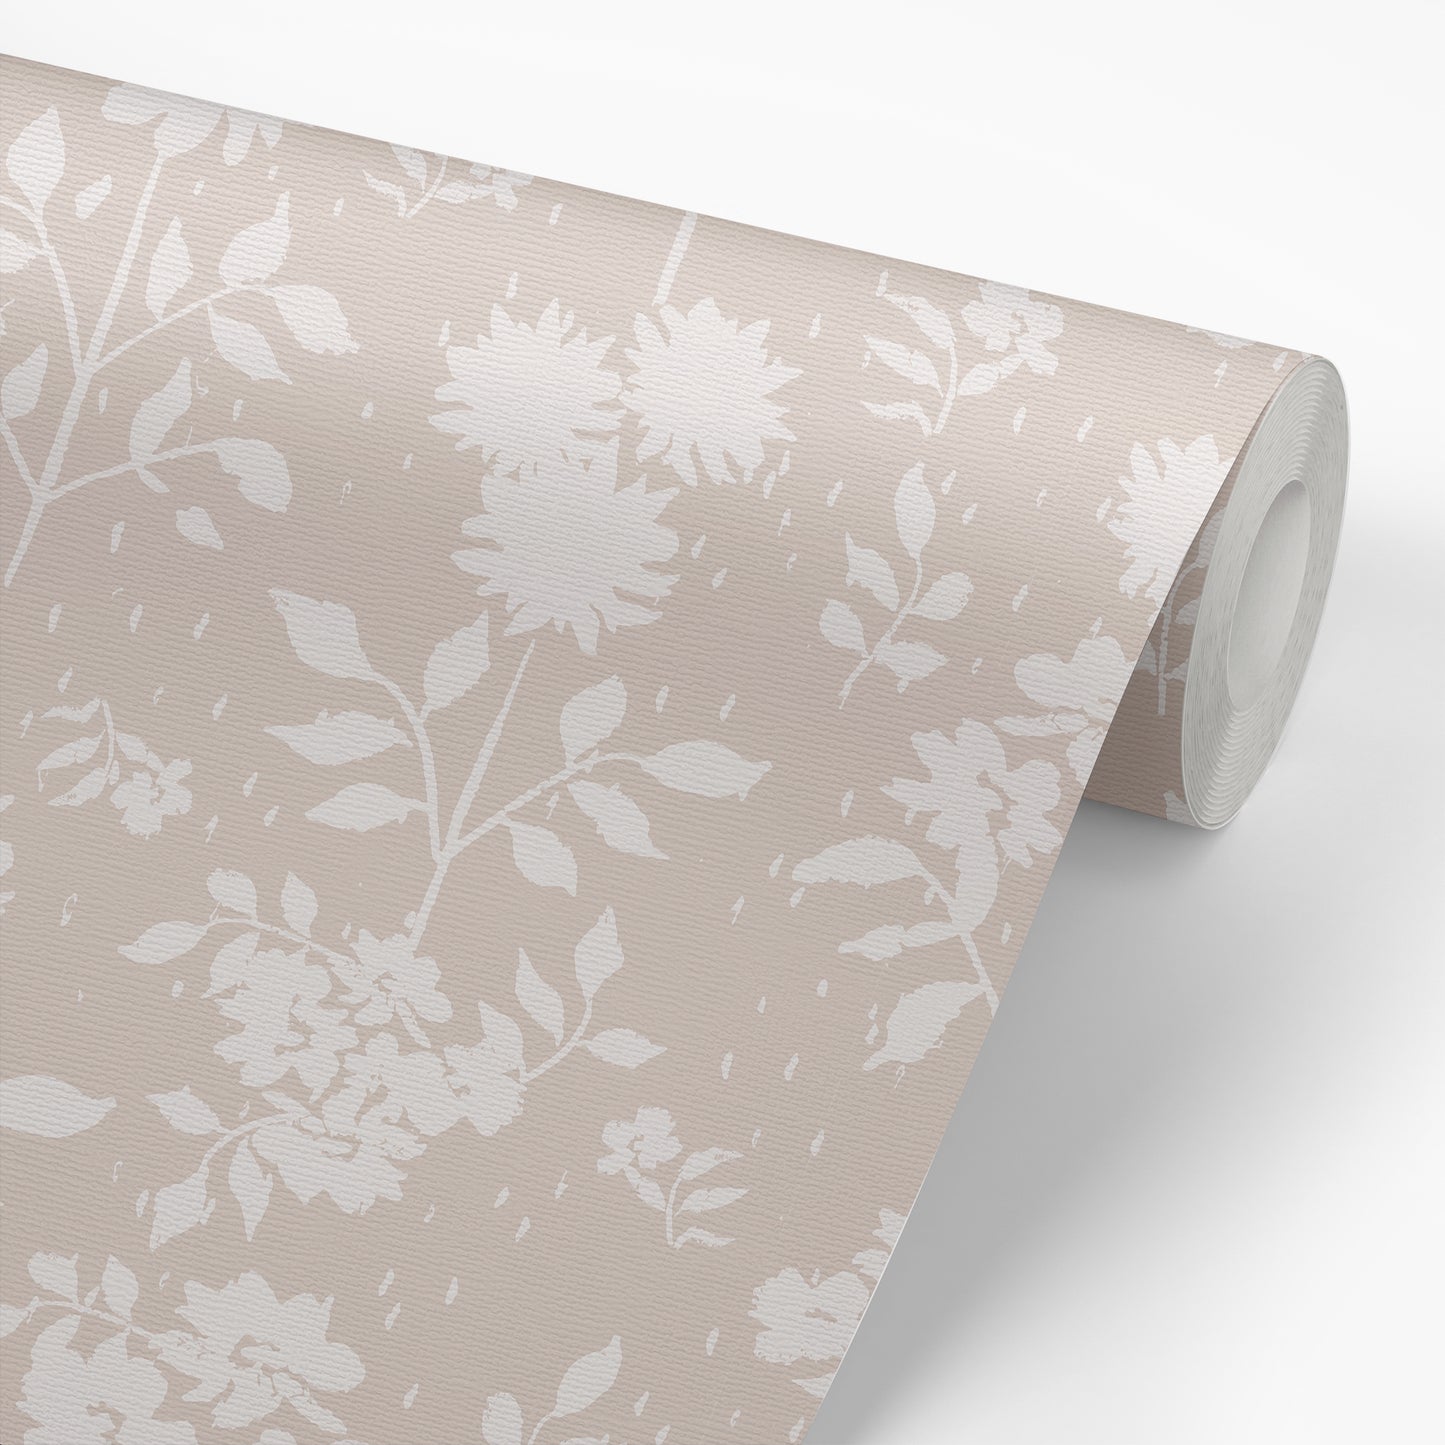 Stunning white floral design on nude background on a luxury roll of designer wallpaper